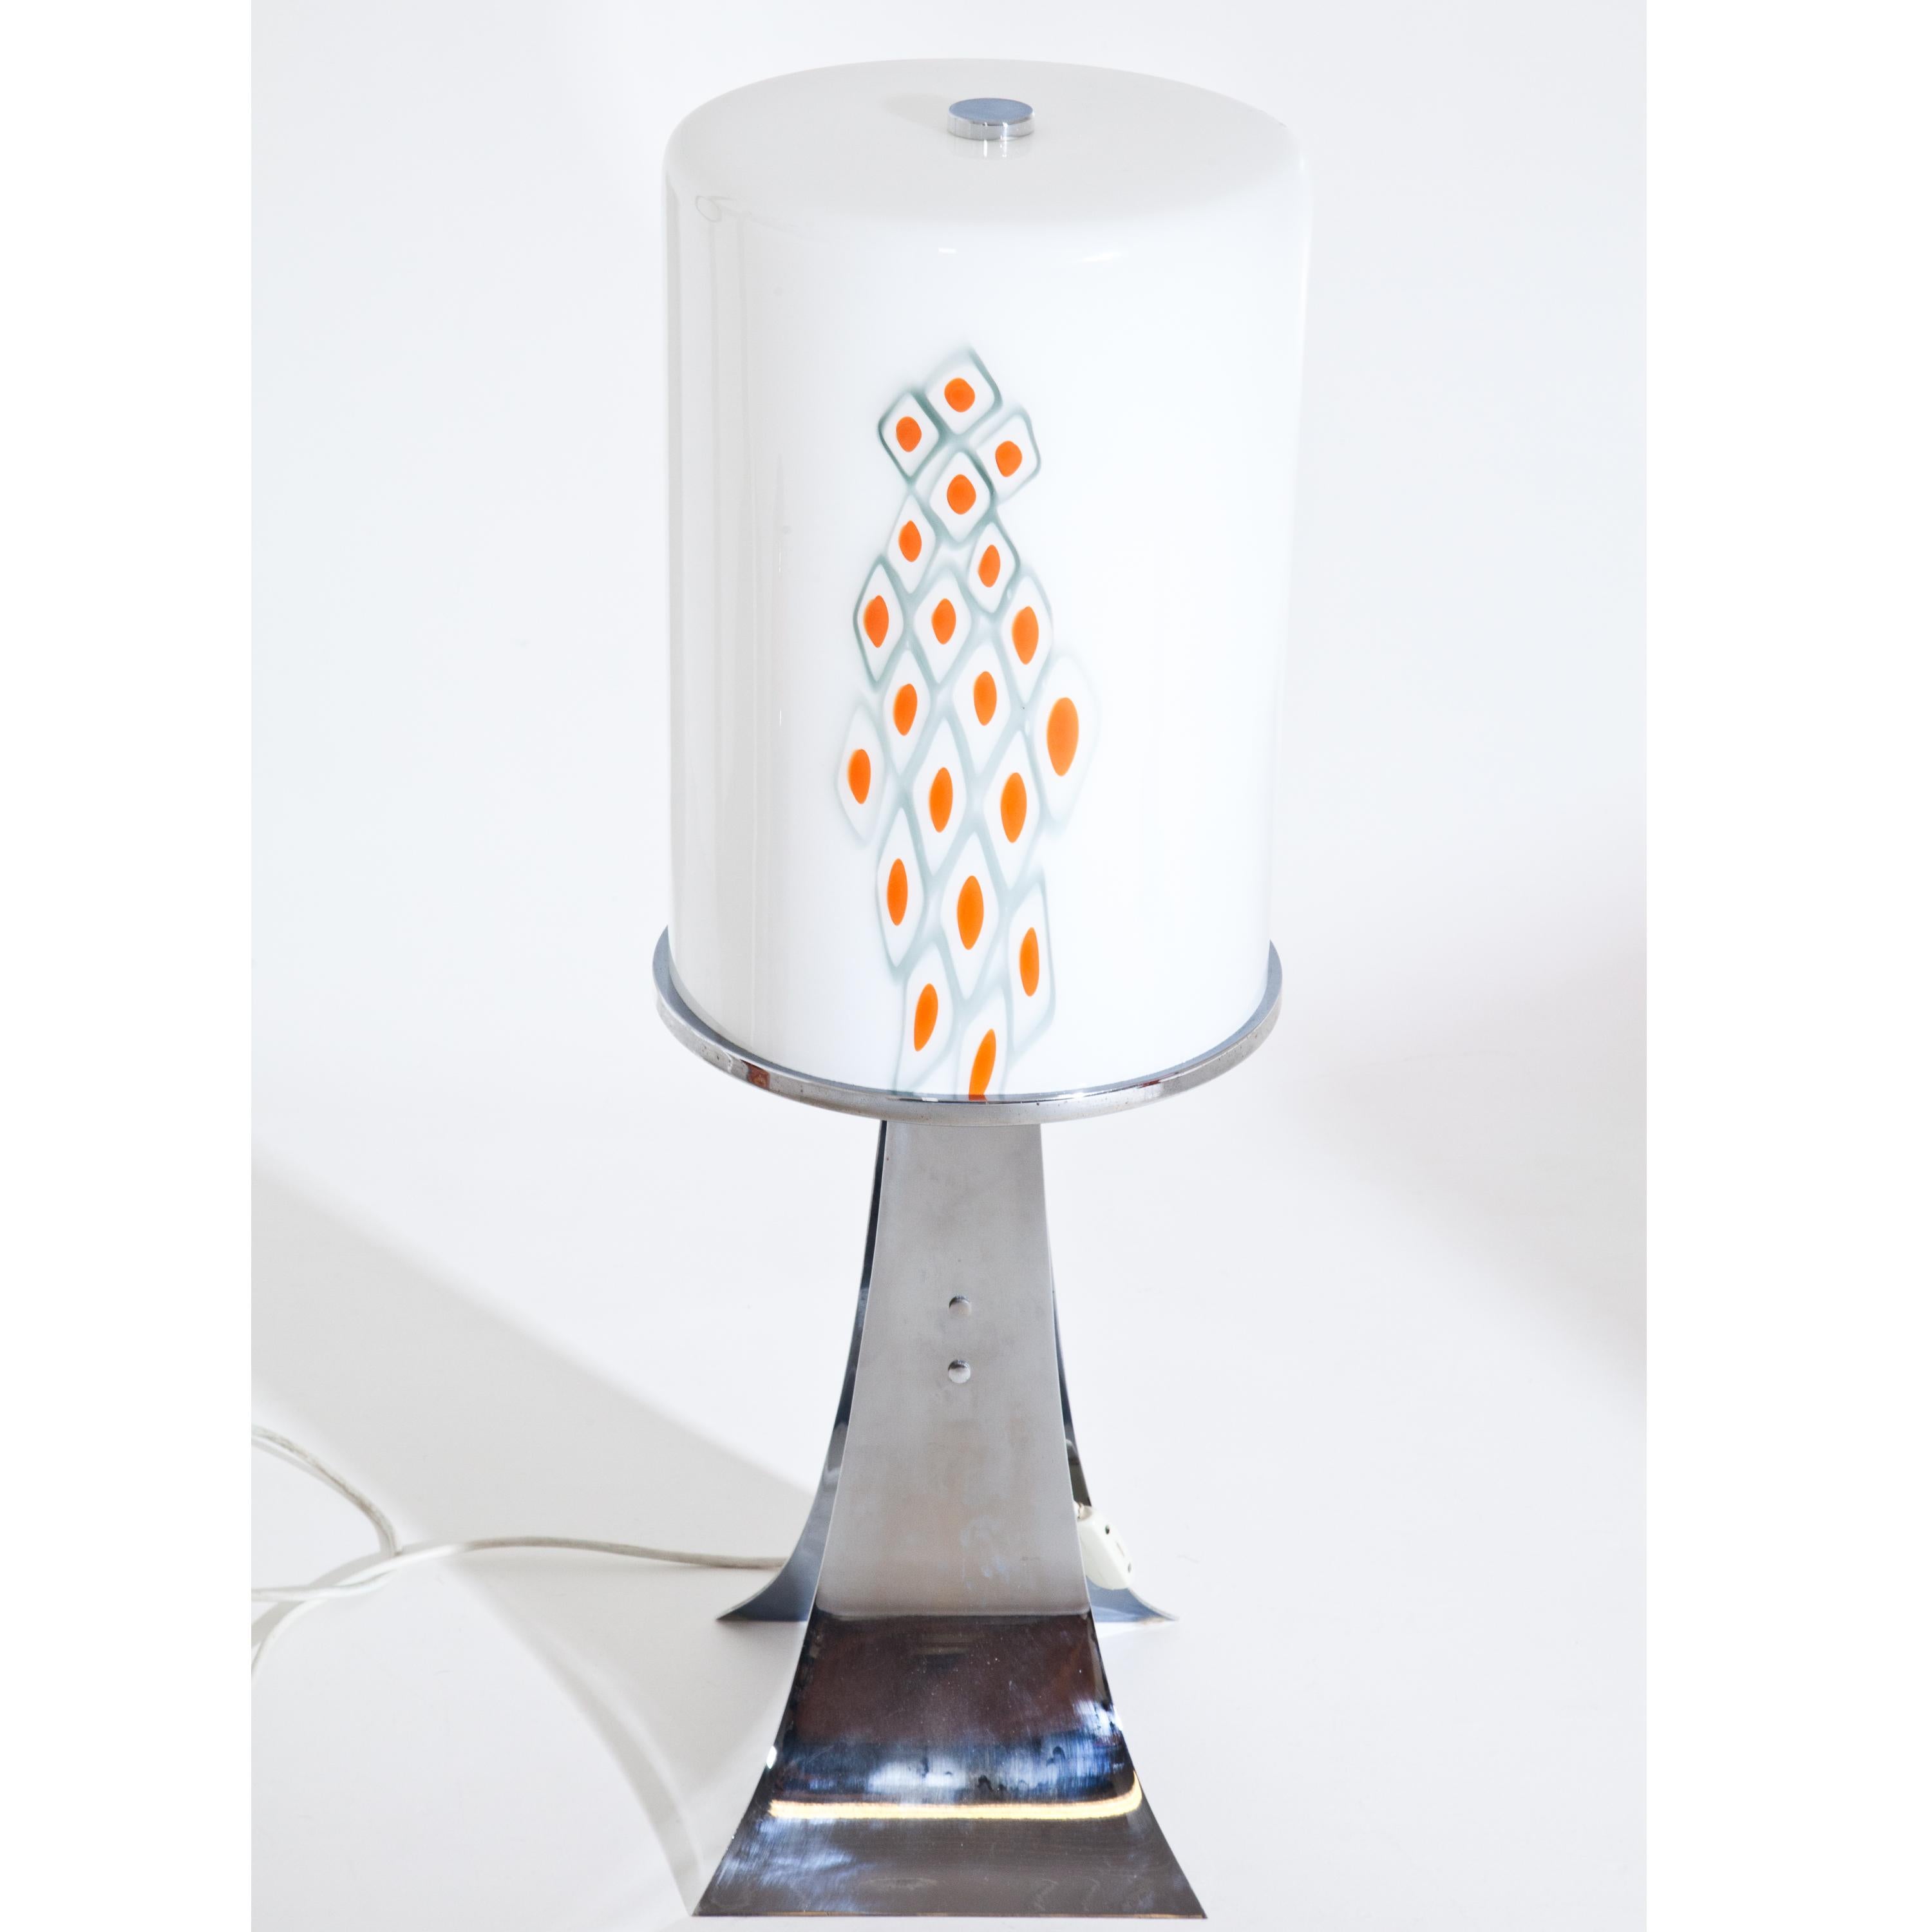 Large table lamp on chromed base and white Murano glass lampshade with orange inclusions. For the electrification we assume no liability and no warranty.